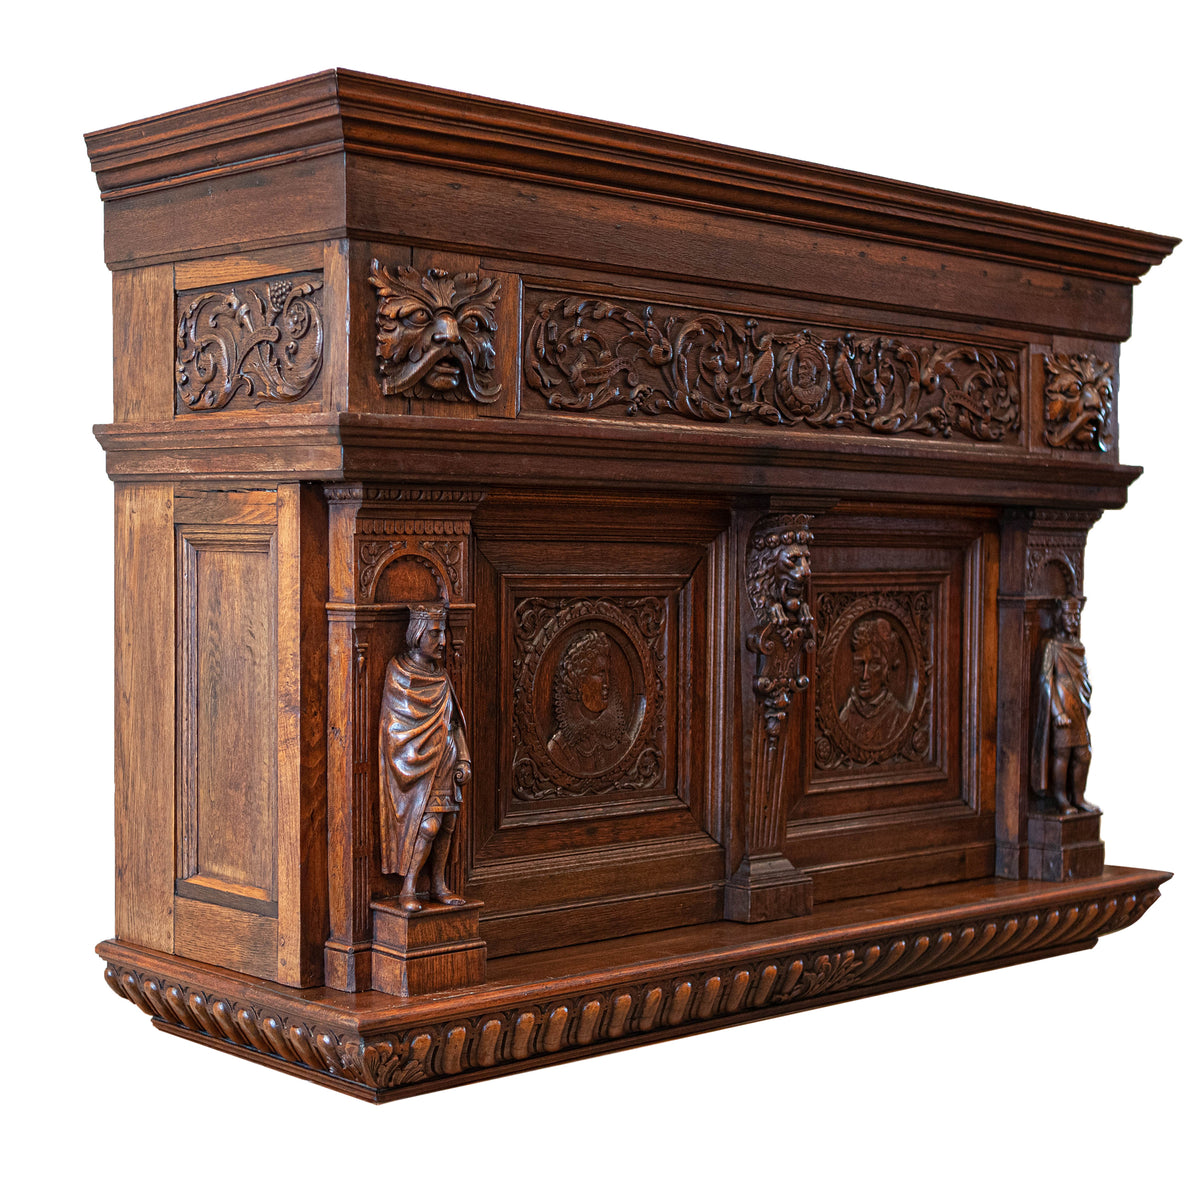 Antique Heavily Carved Oak Jacobean Style Wooden Element | Overmantle | The Architectural Forum